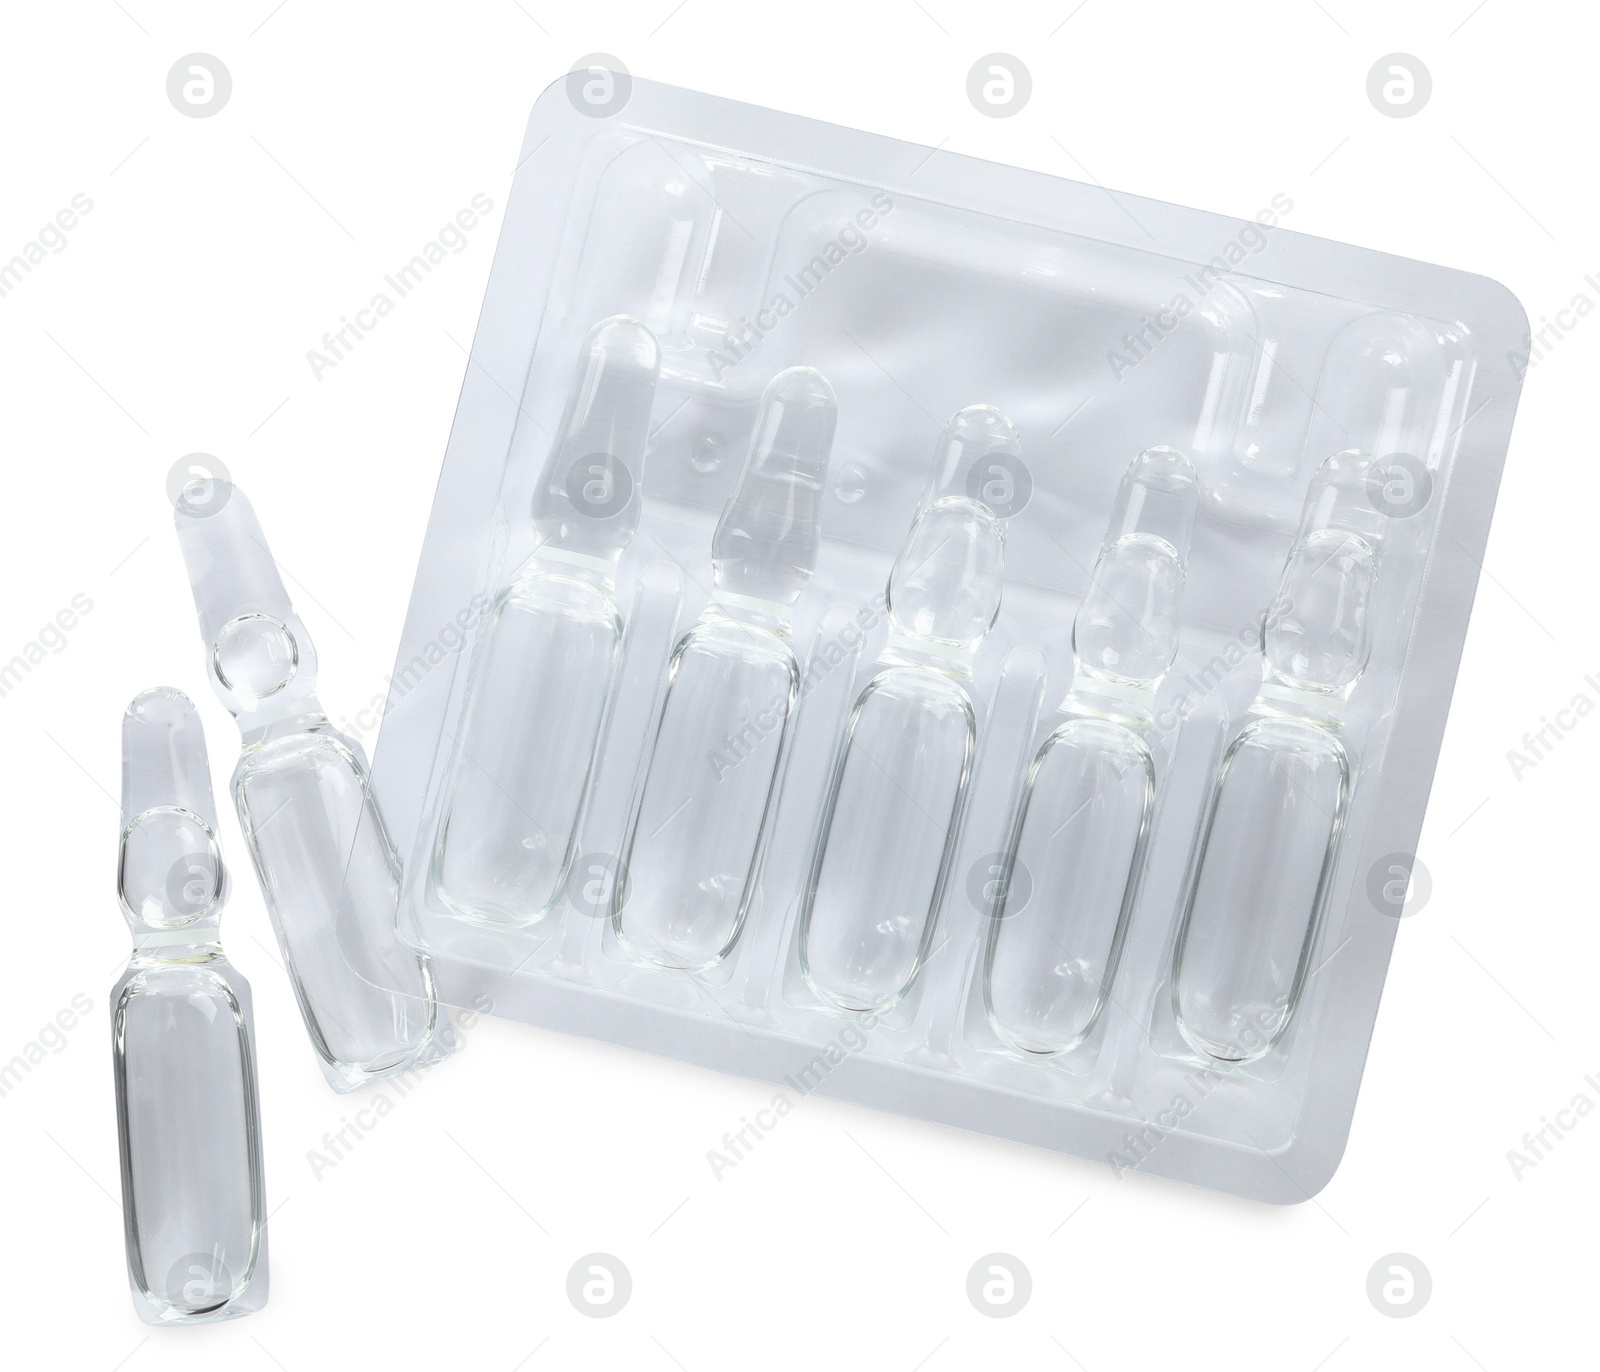 Photo of Glass ampoules with pharmaceutical product on white background, top view